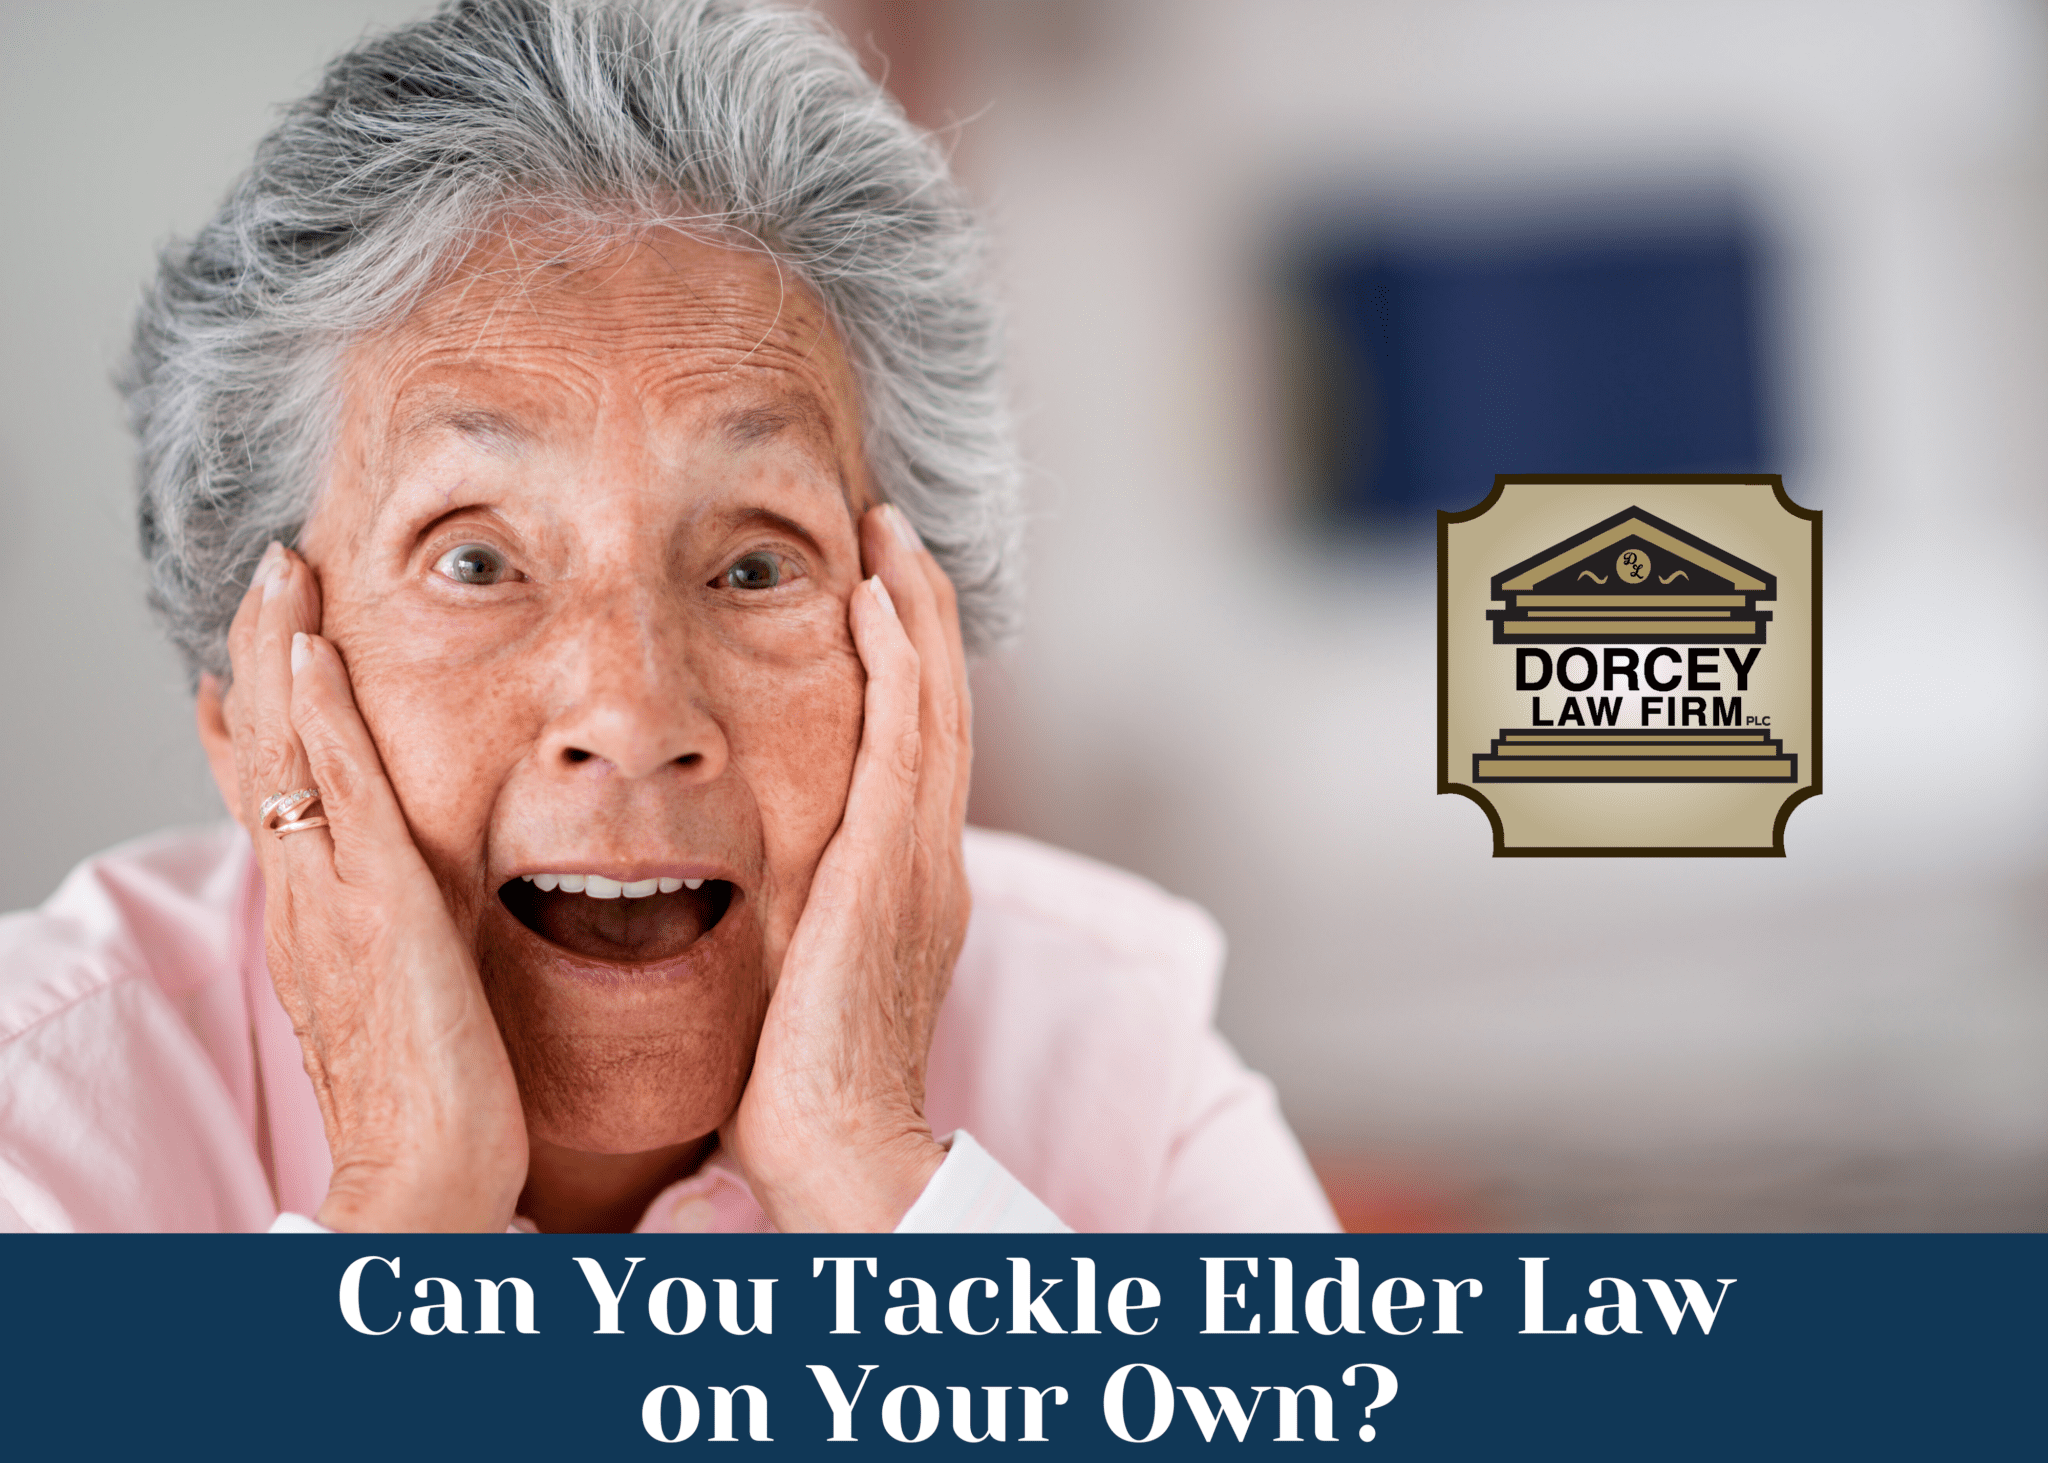 Can You Tackle Elder Law on Your Own?